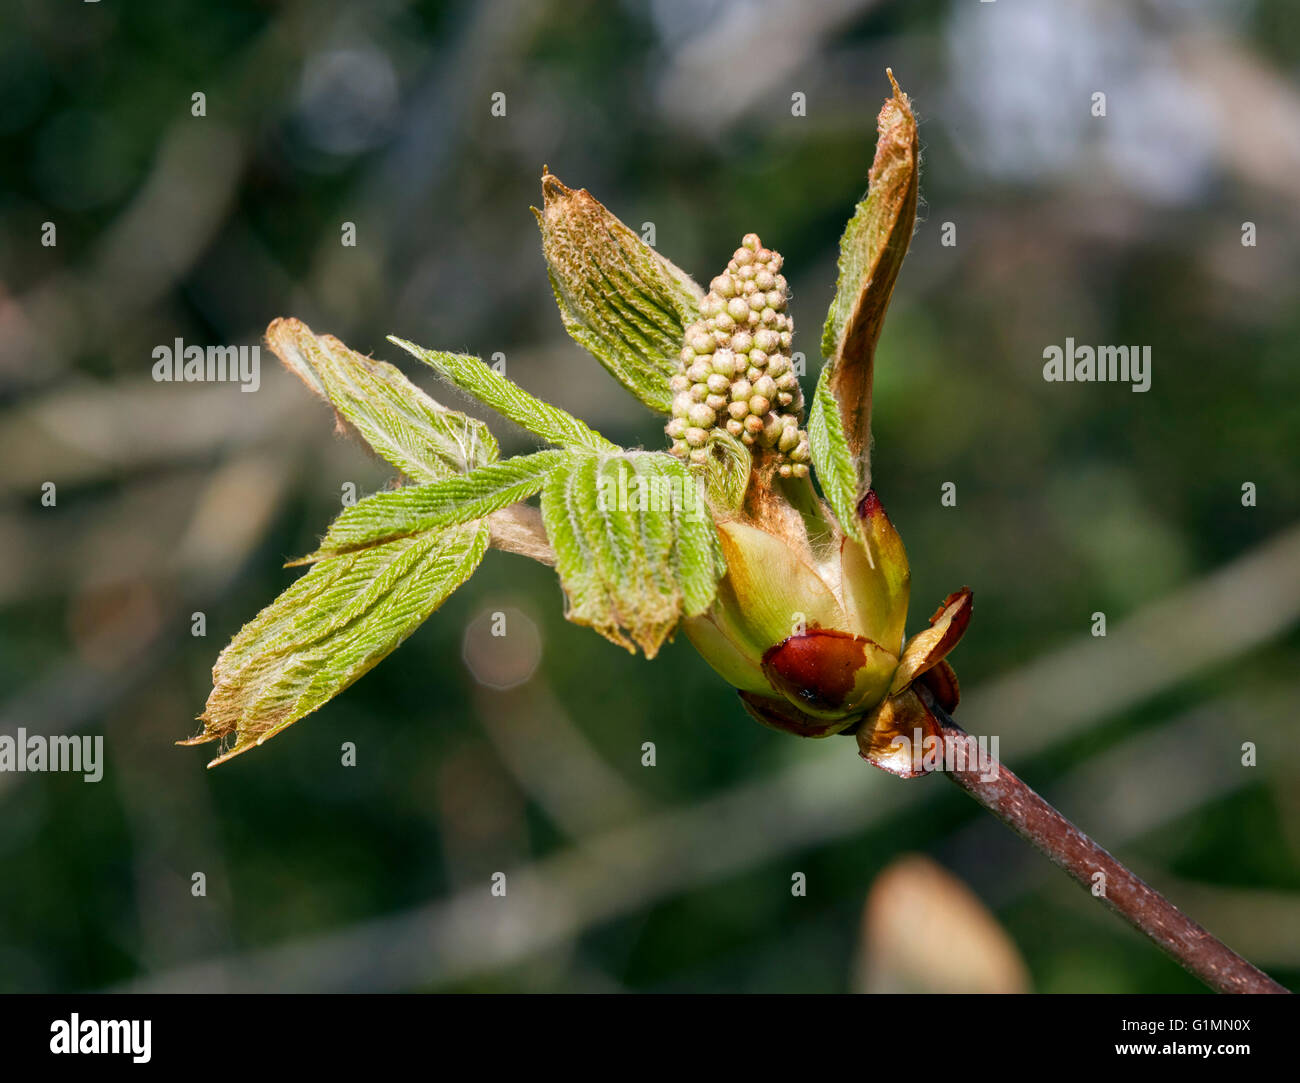 Horse Chestnut flower bud and leaves. Hurst Meadows, West Molesey, Surrey, England. Stock Photo